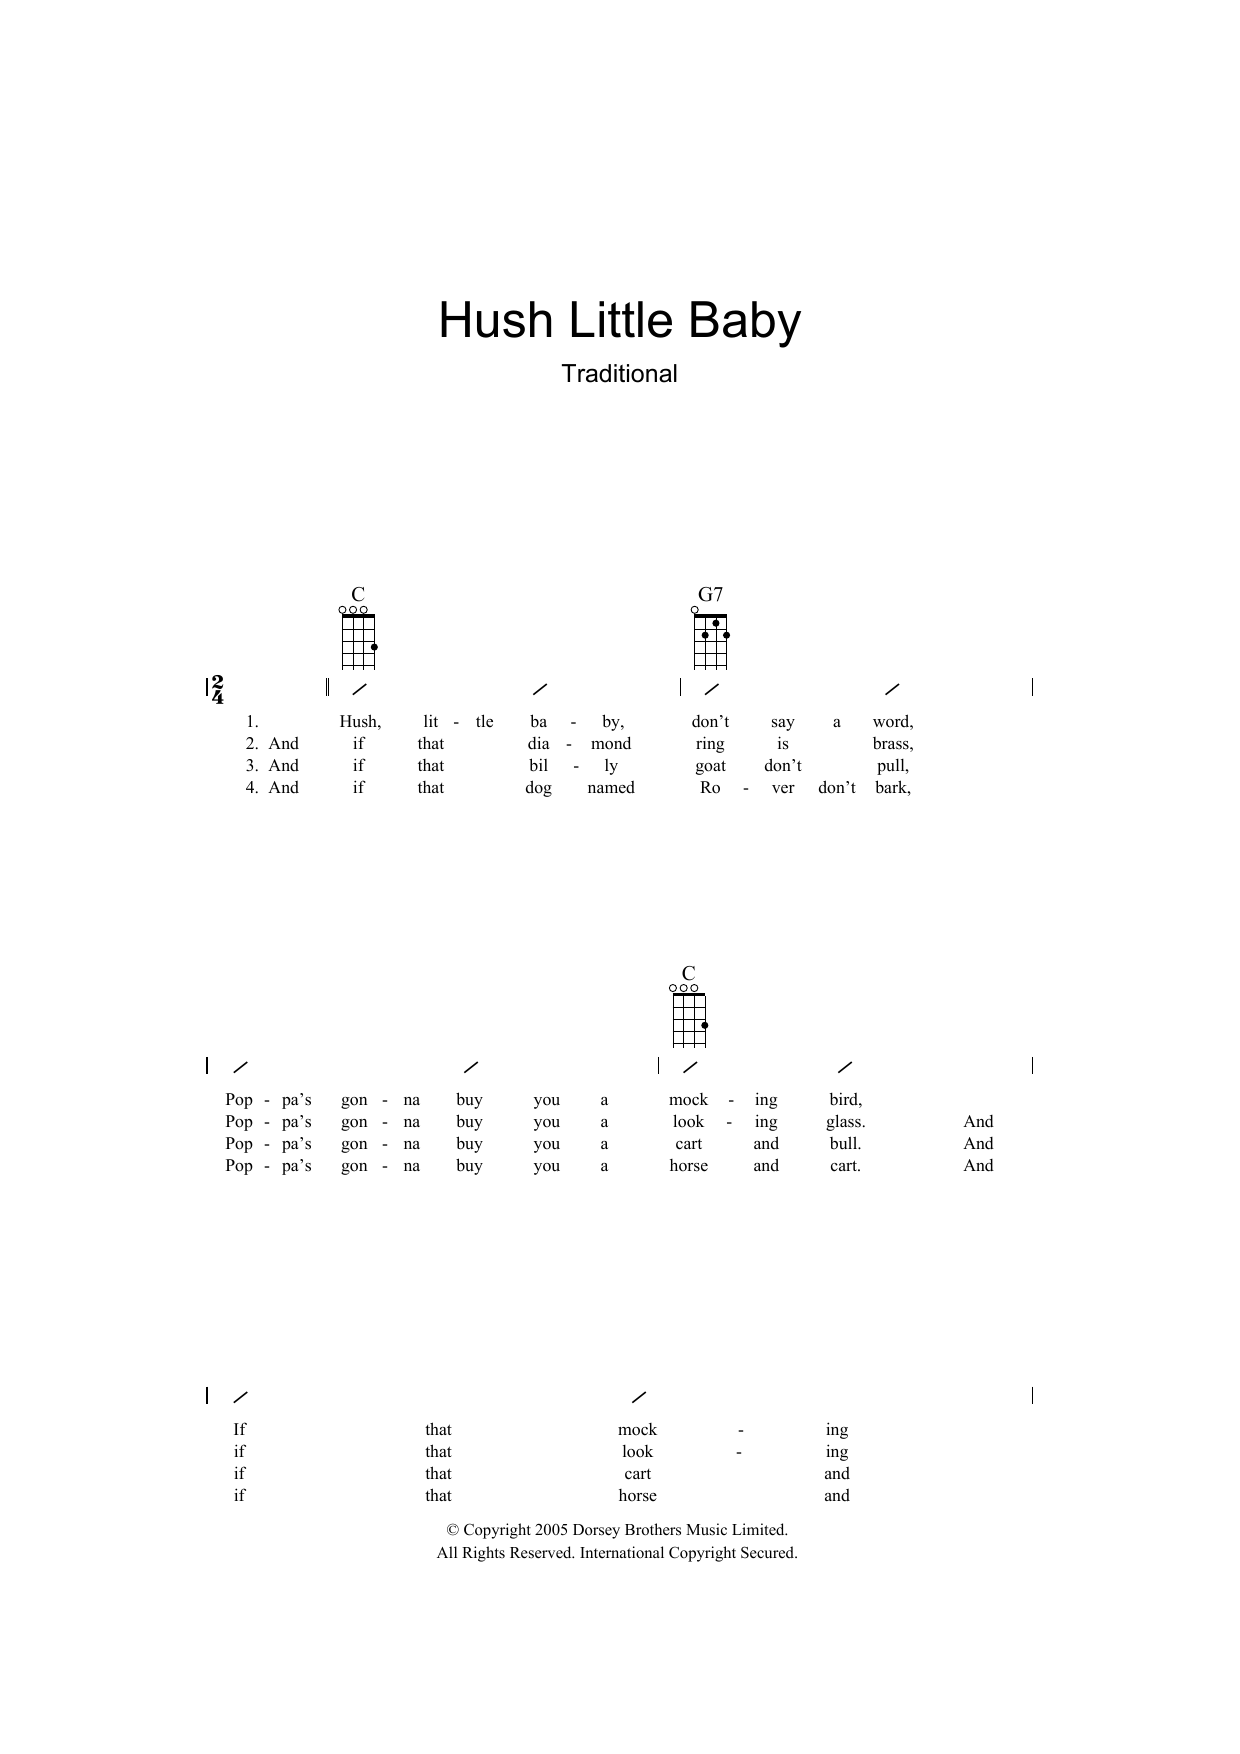 Traditional "Hush Little Baby" Sheet Music Notes, | Traditional Score Ukulele with Strumming Patterns Download Printable. SKU: 39506